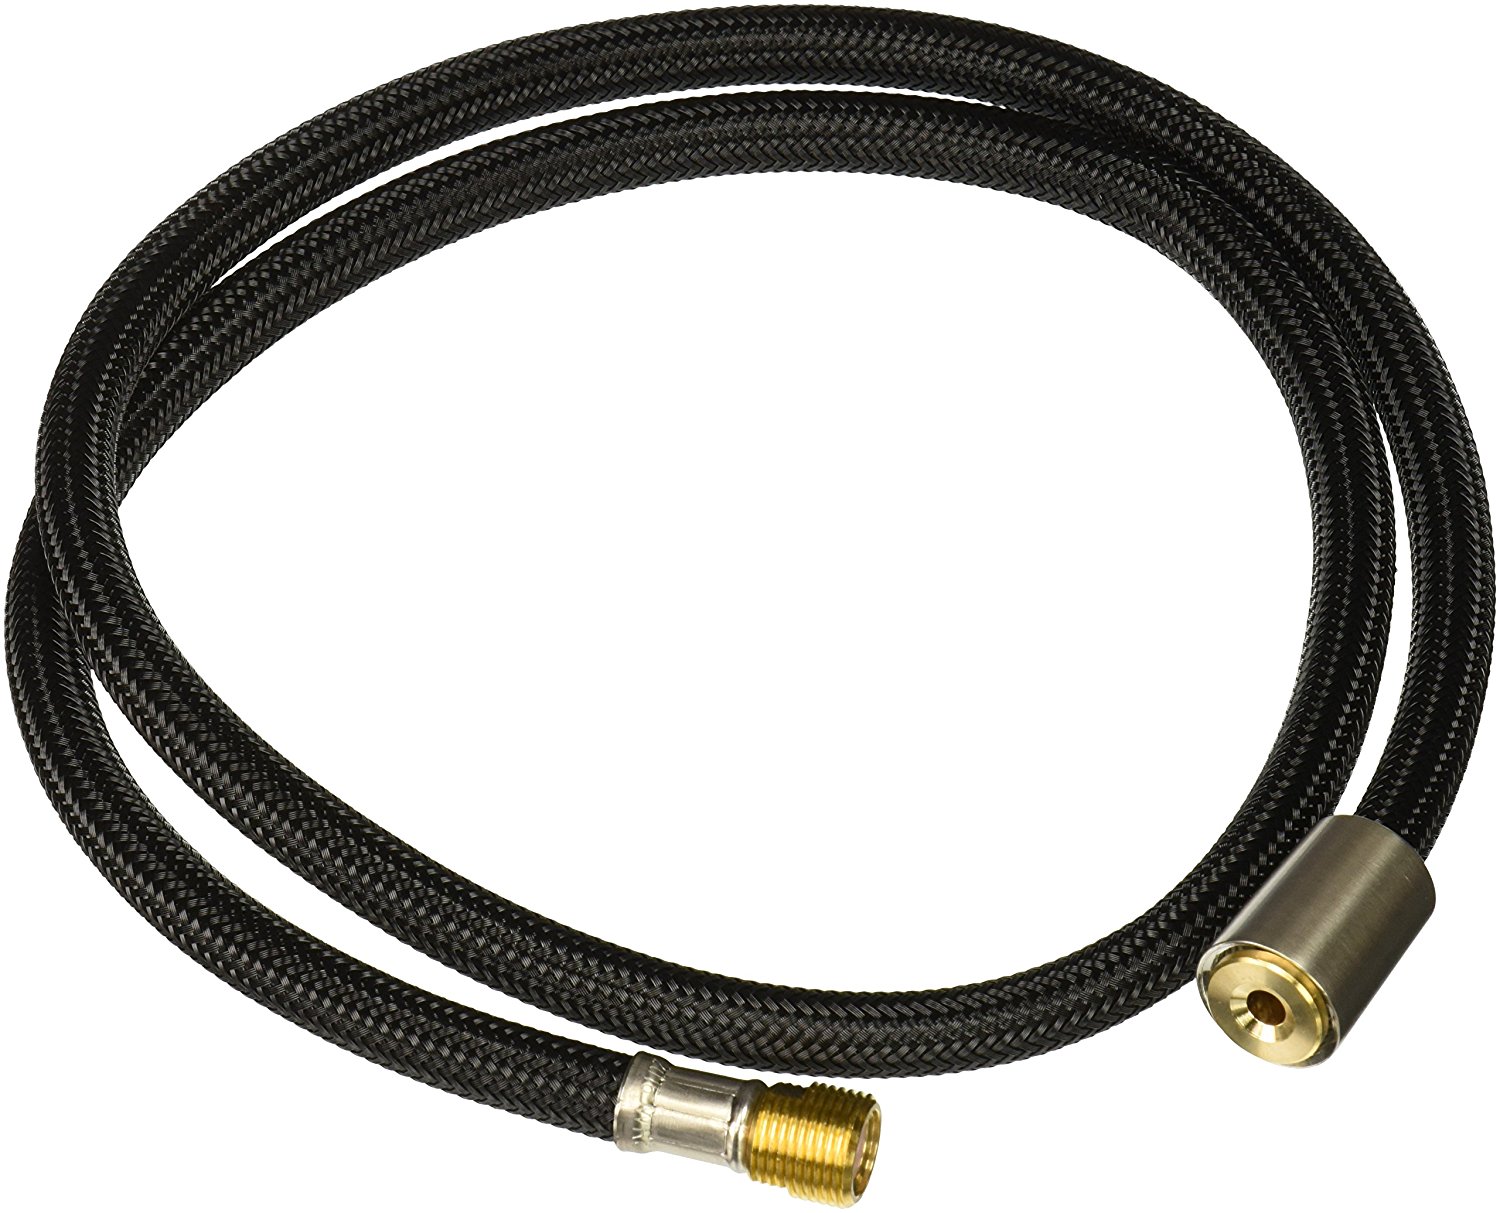 Perrin & Rowe 47" Rinse Hose Black Nylon for Sidespray Kitchen Faucets Satin Nickel